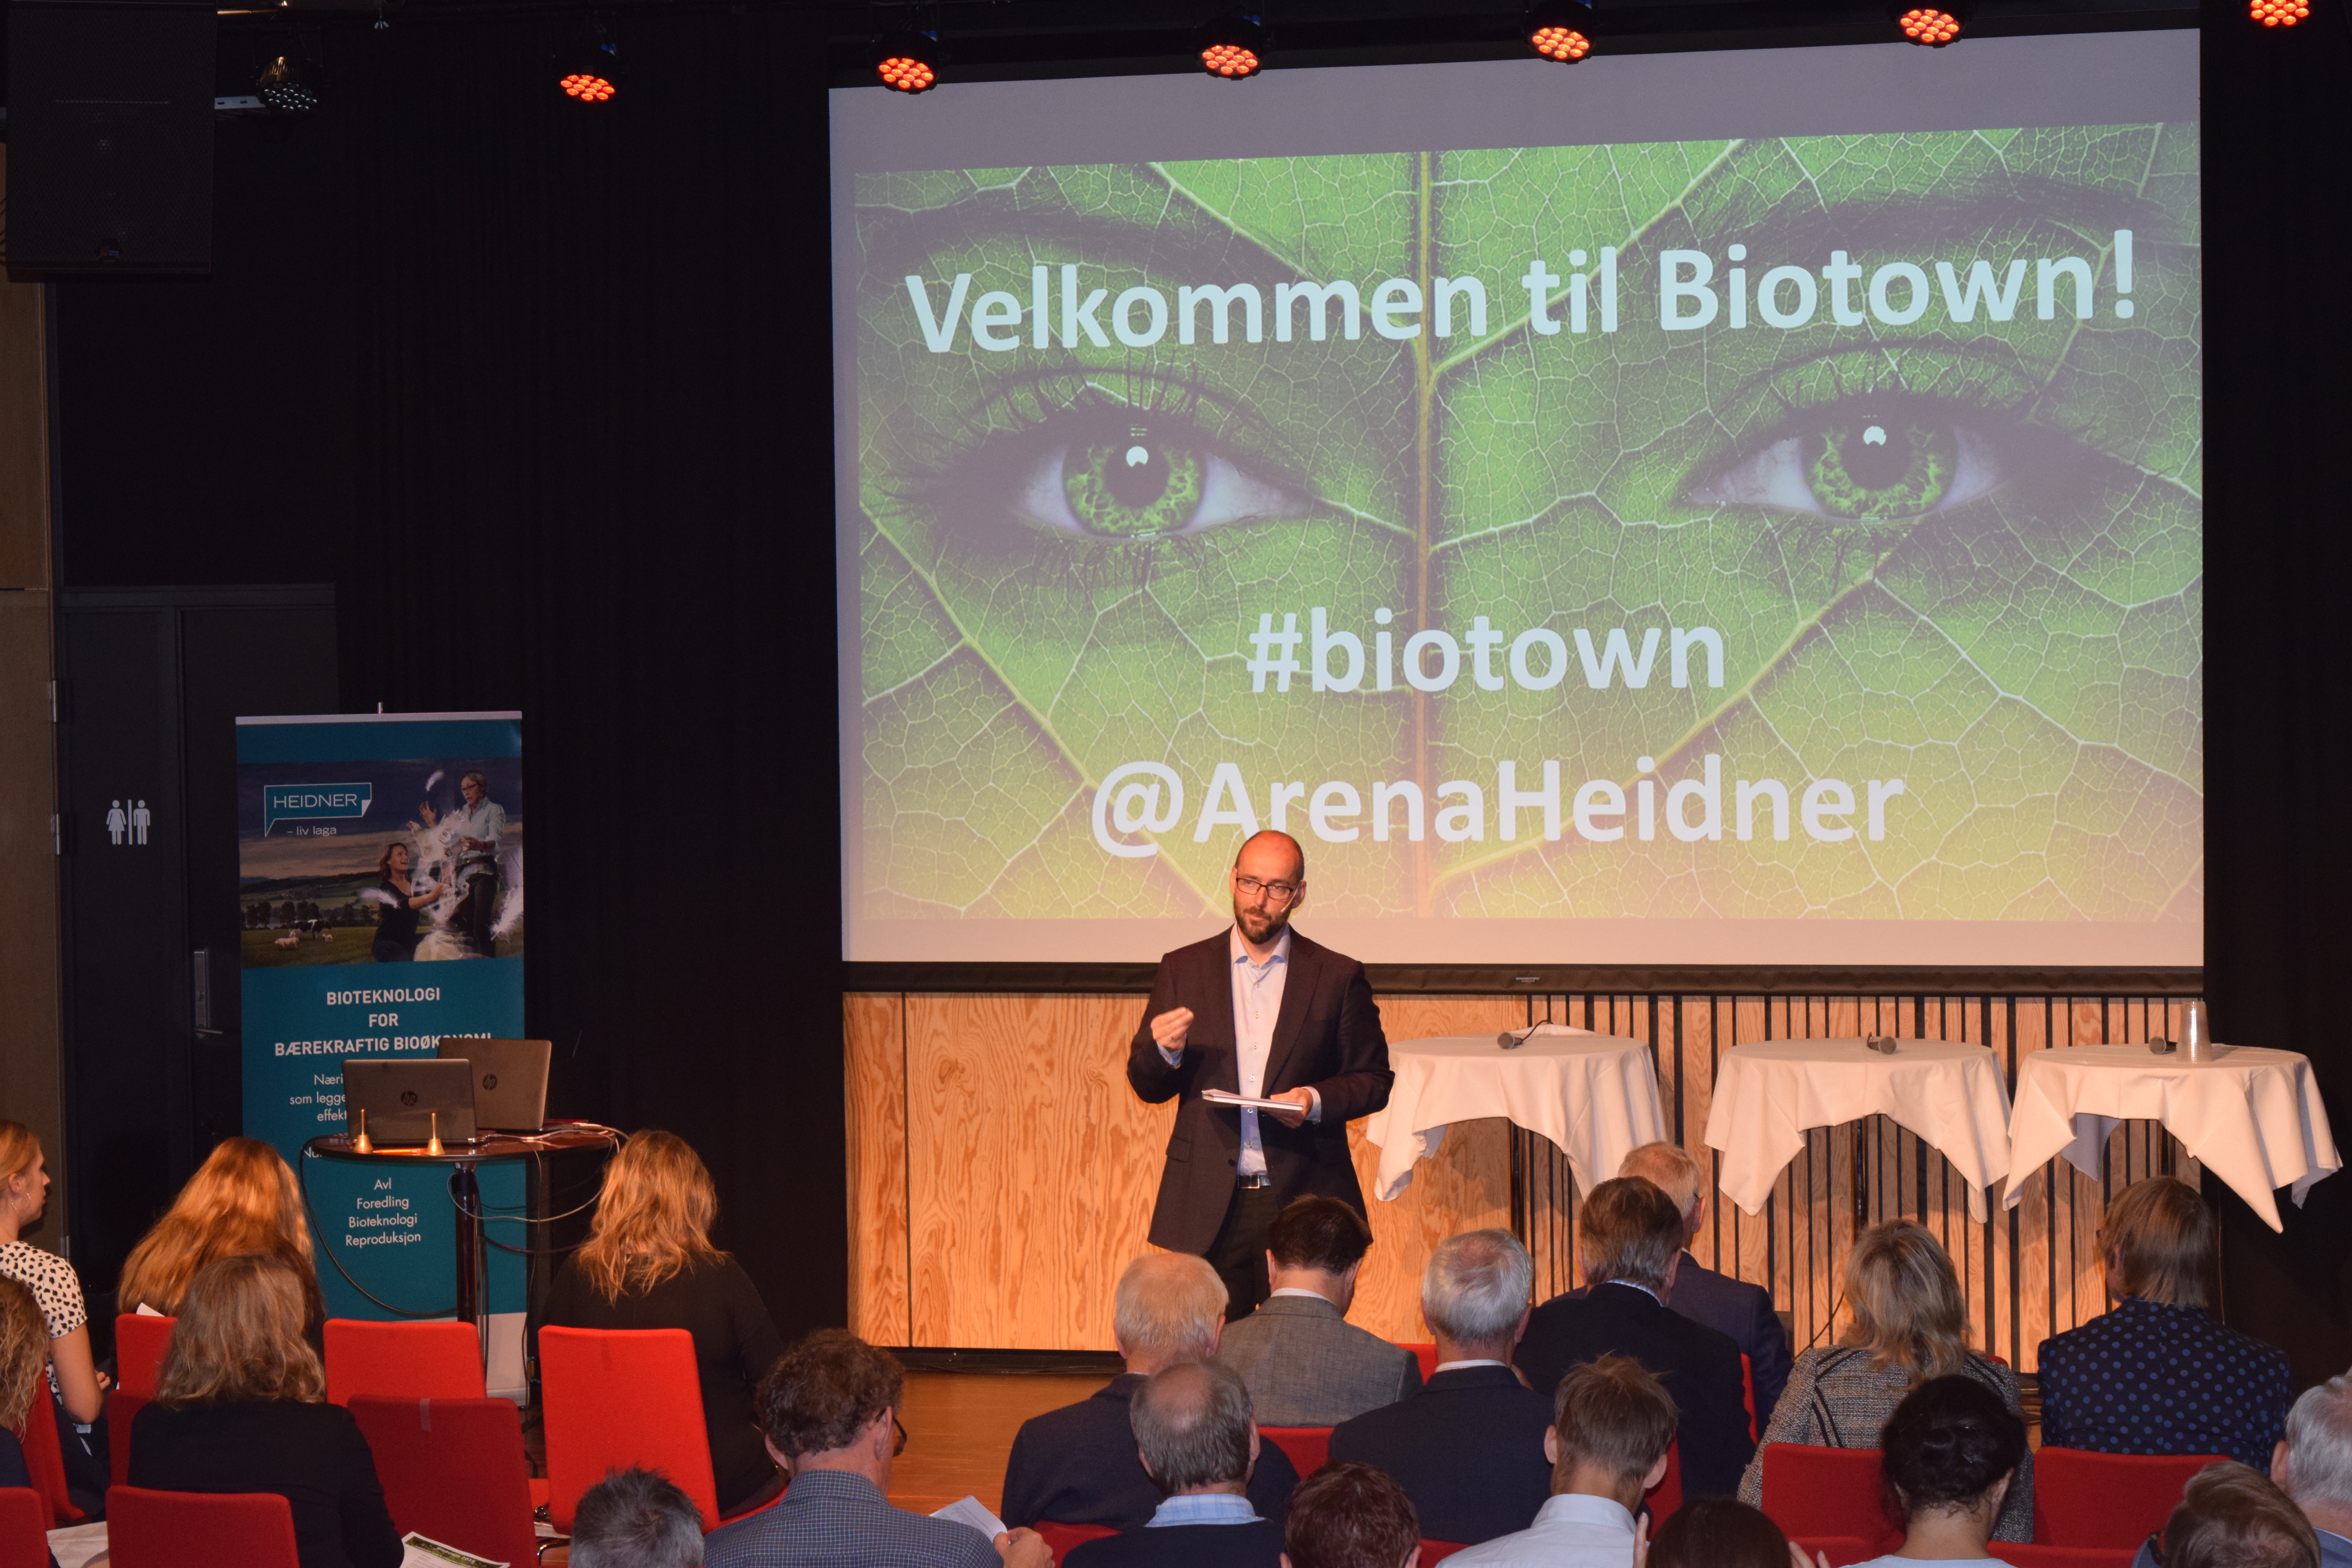 Well received "Biotown" – conference